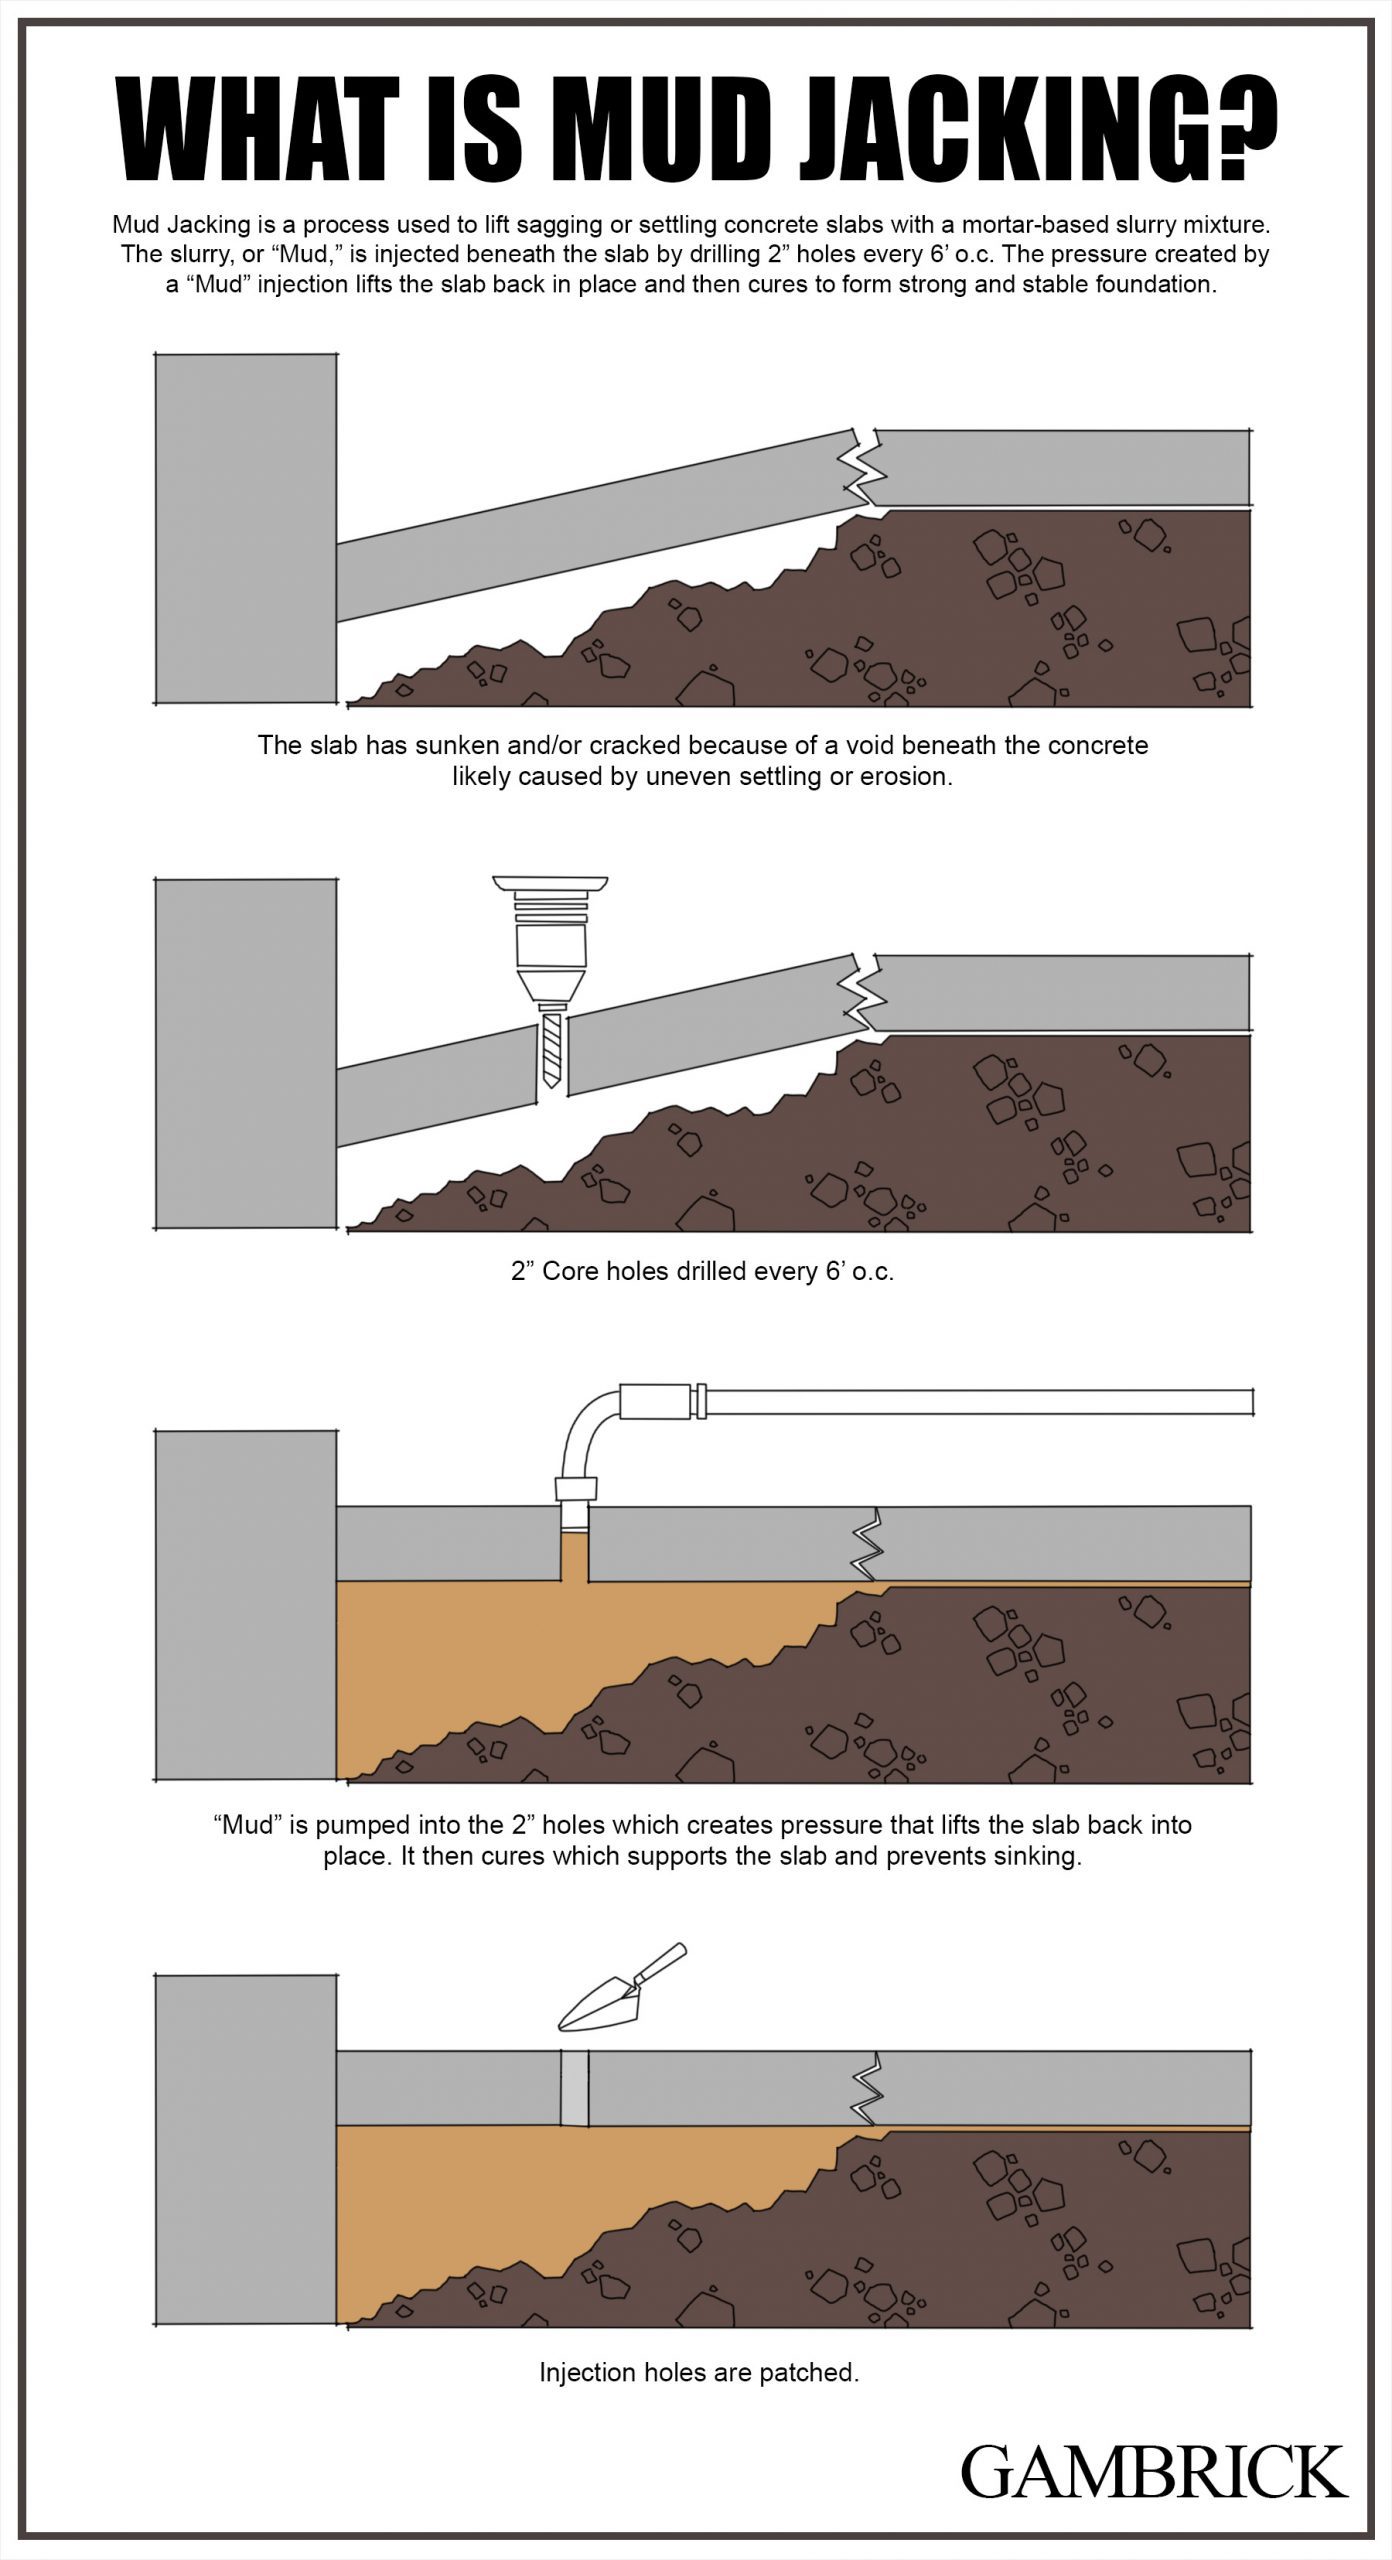 what is mud jacking infographic chart 1.0